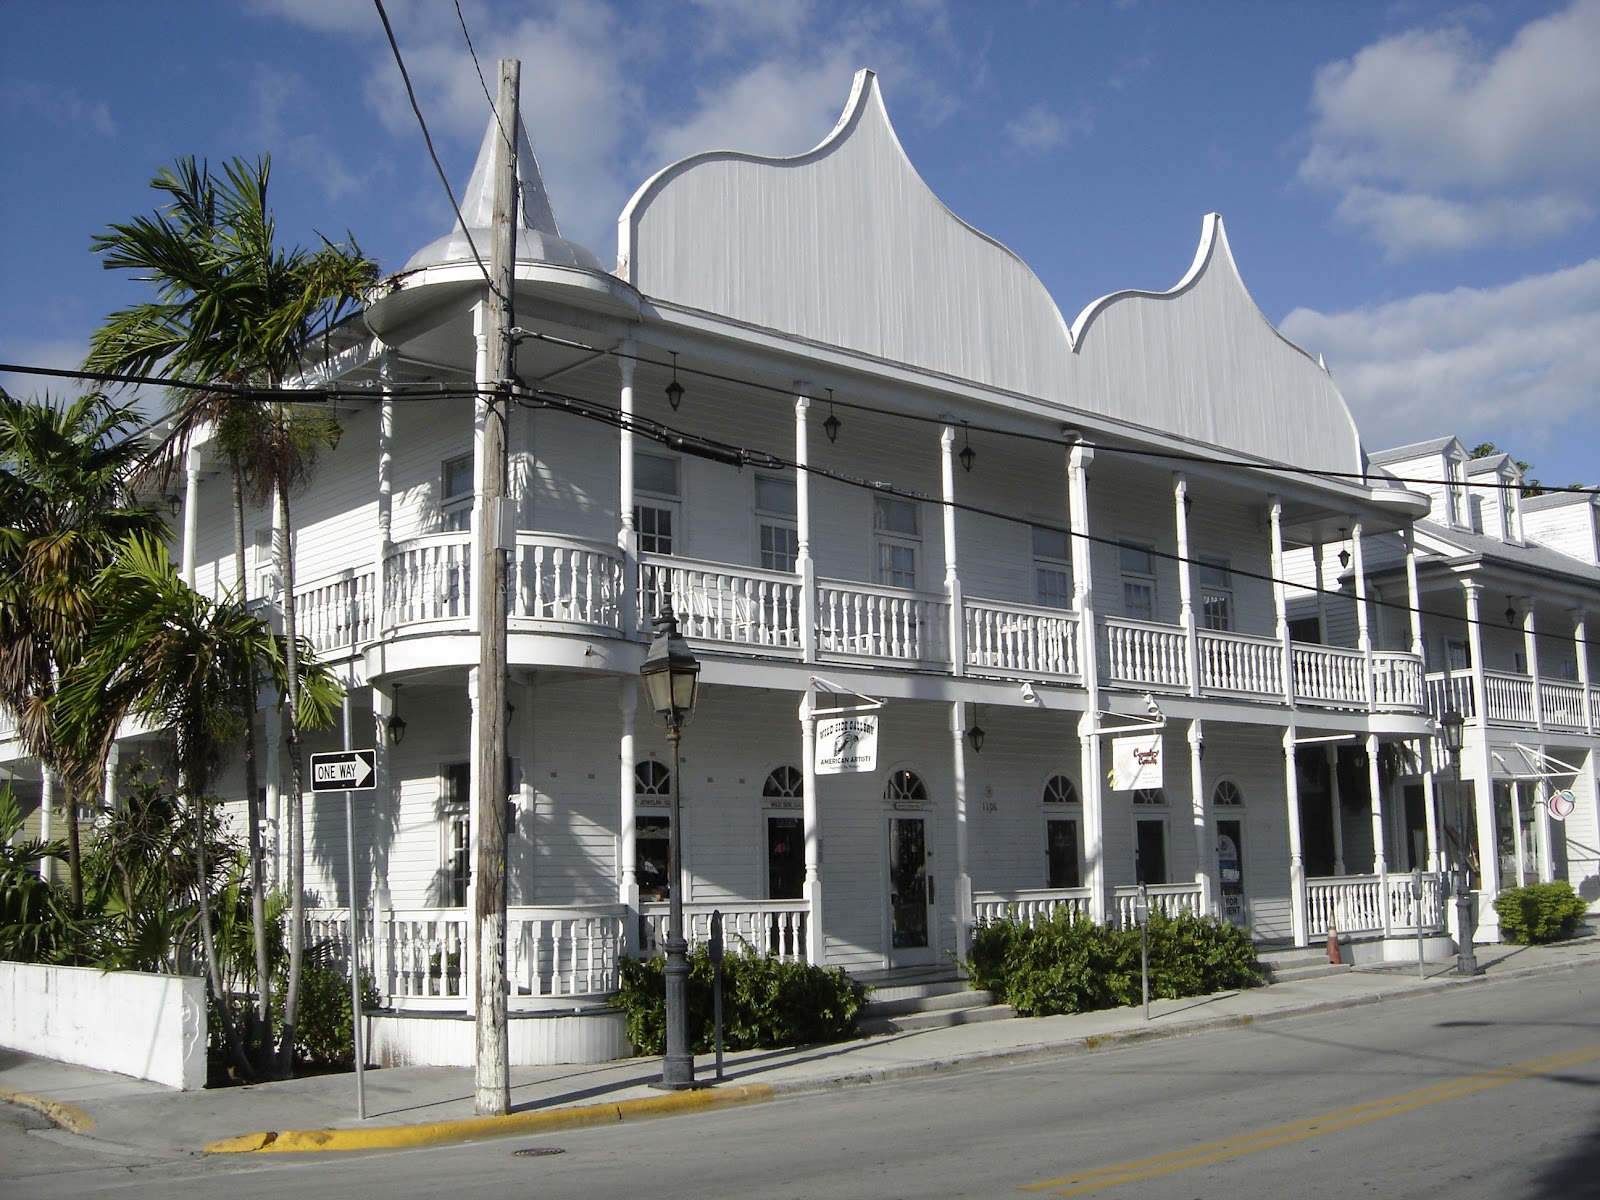 Places To Go, Buildings To See: Cuban Club - Key West, Florida